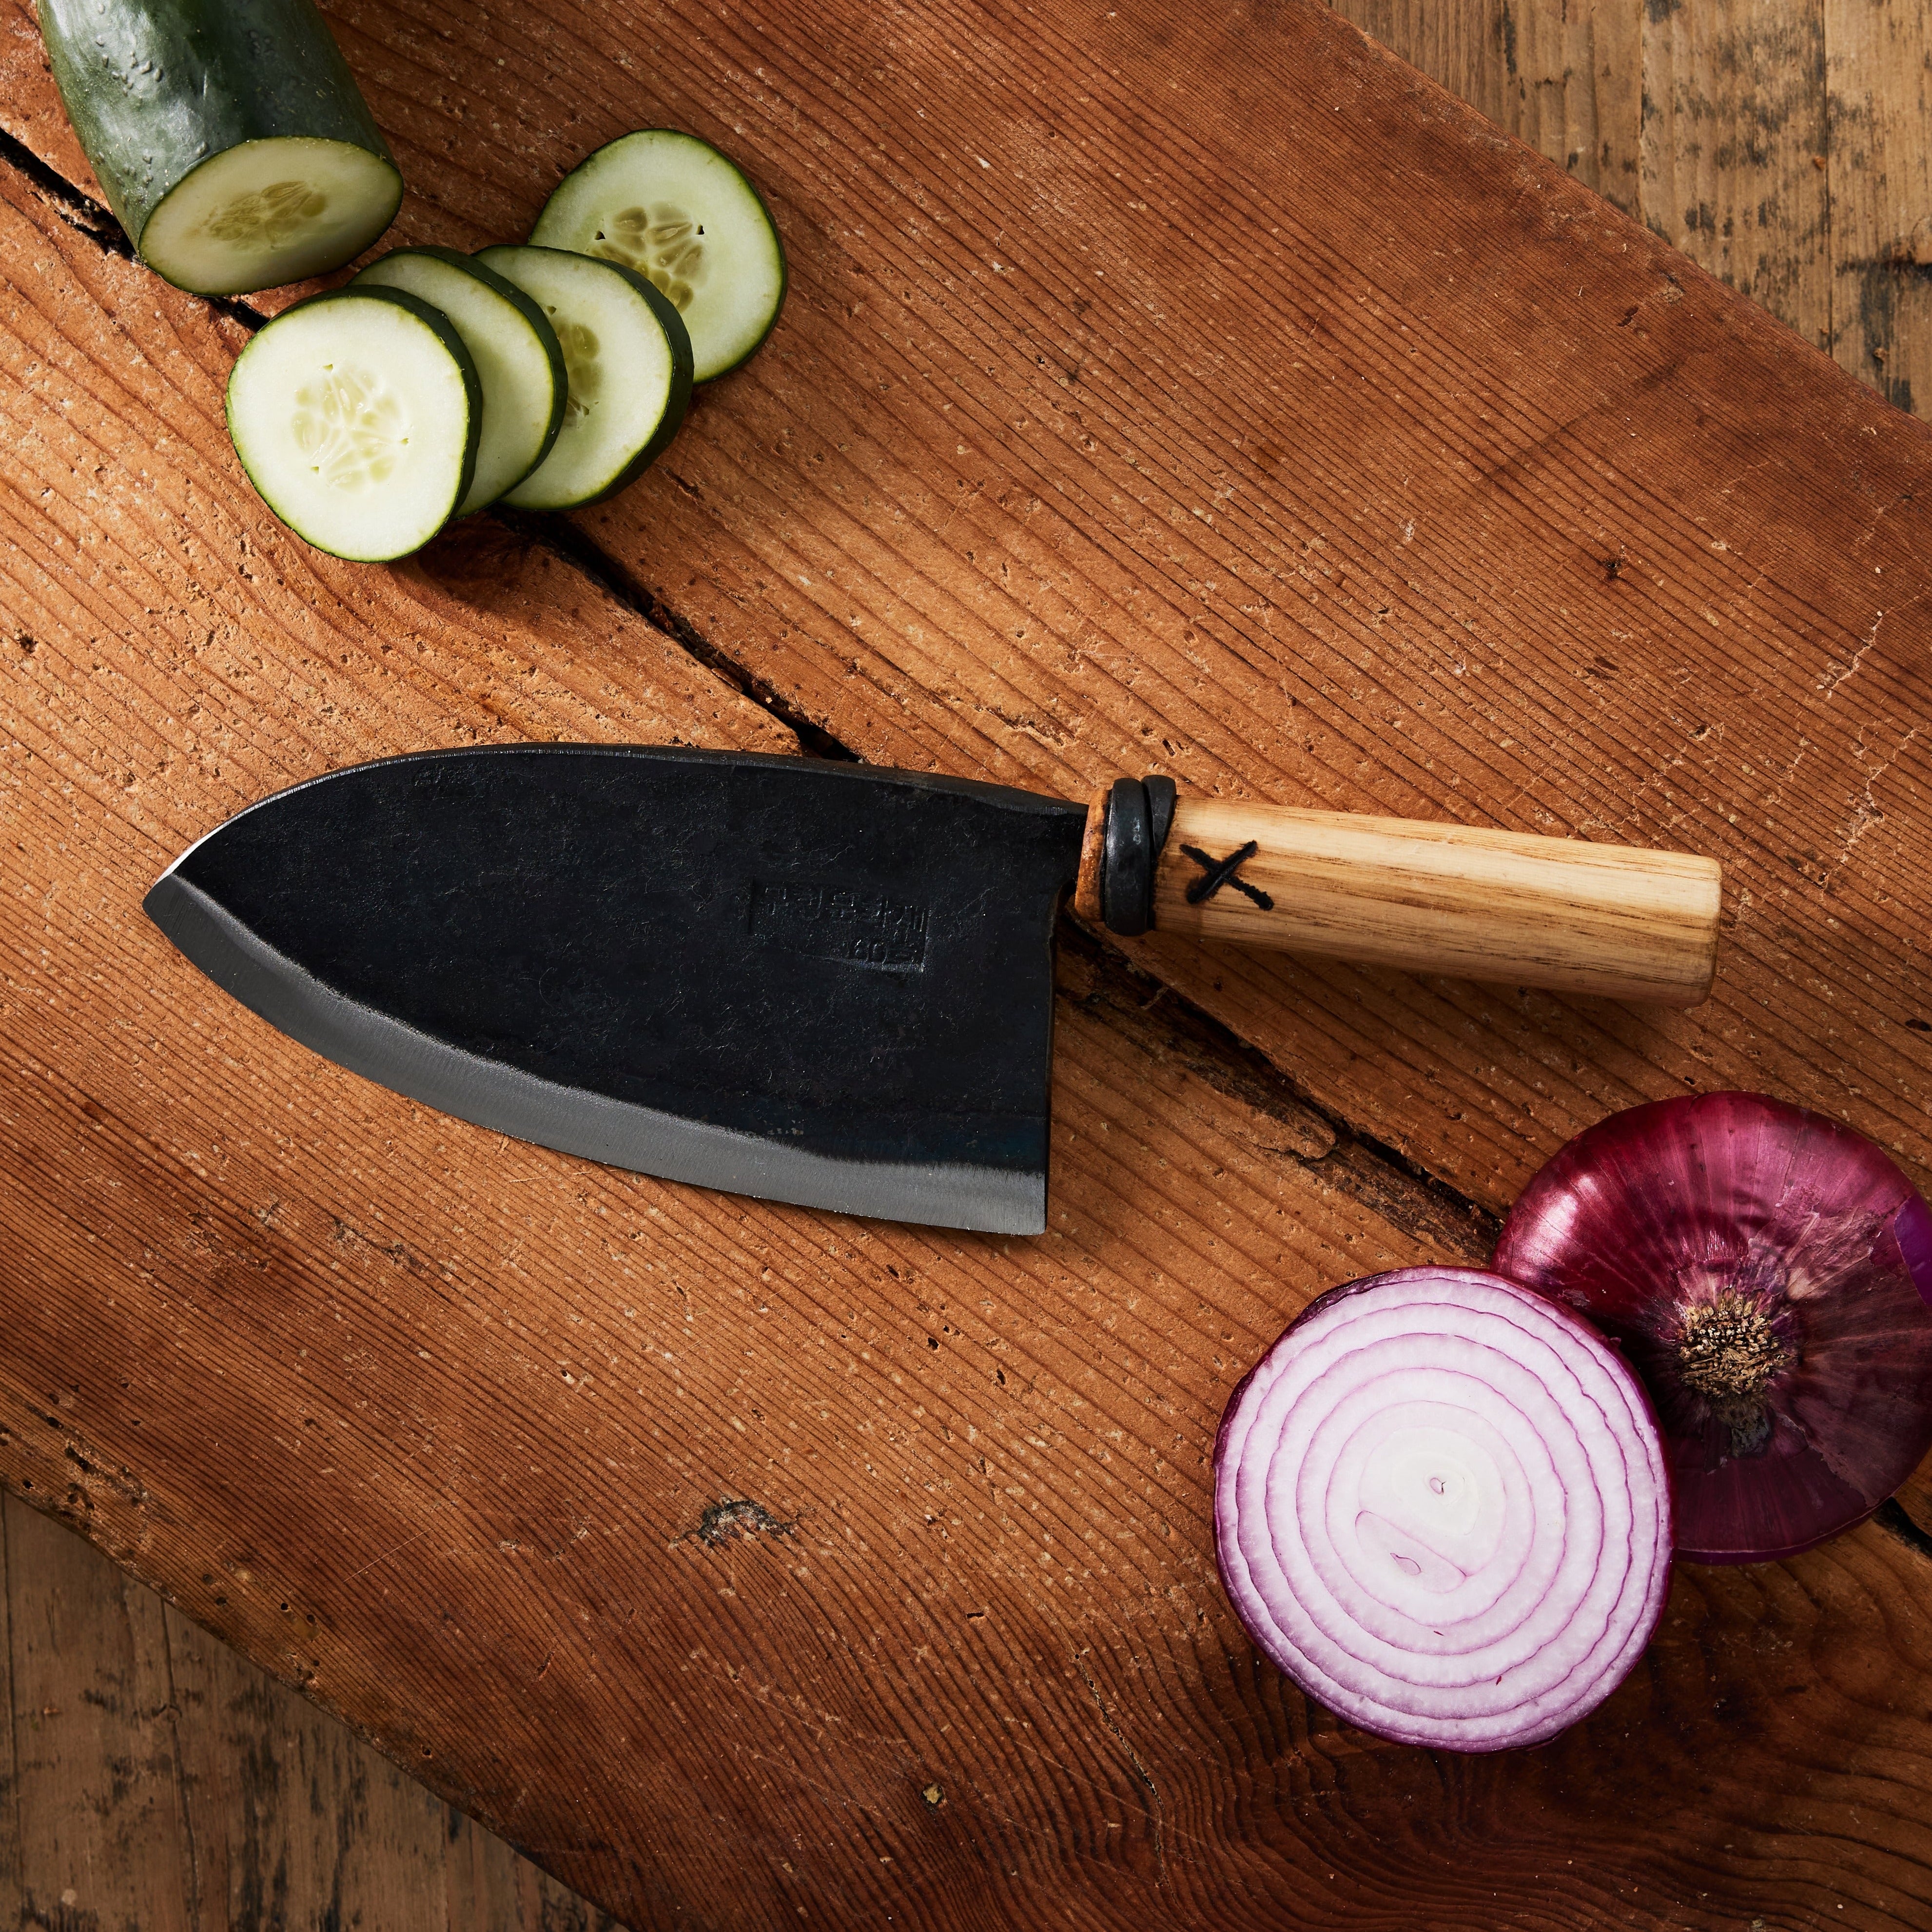 AMEICO - Official US Distributor of Master Shin's Anvil - Large Chef's Knife